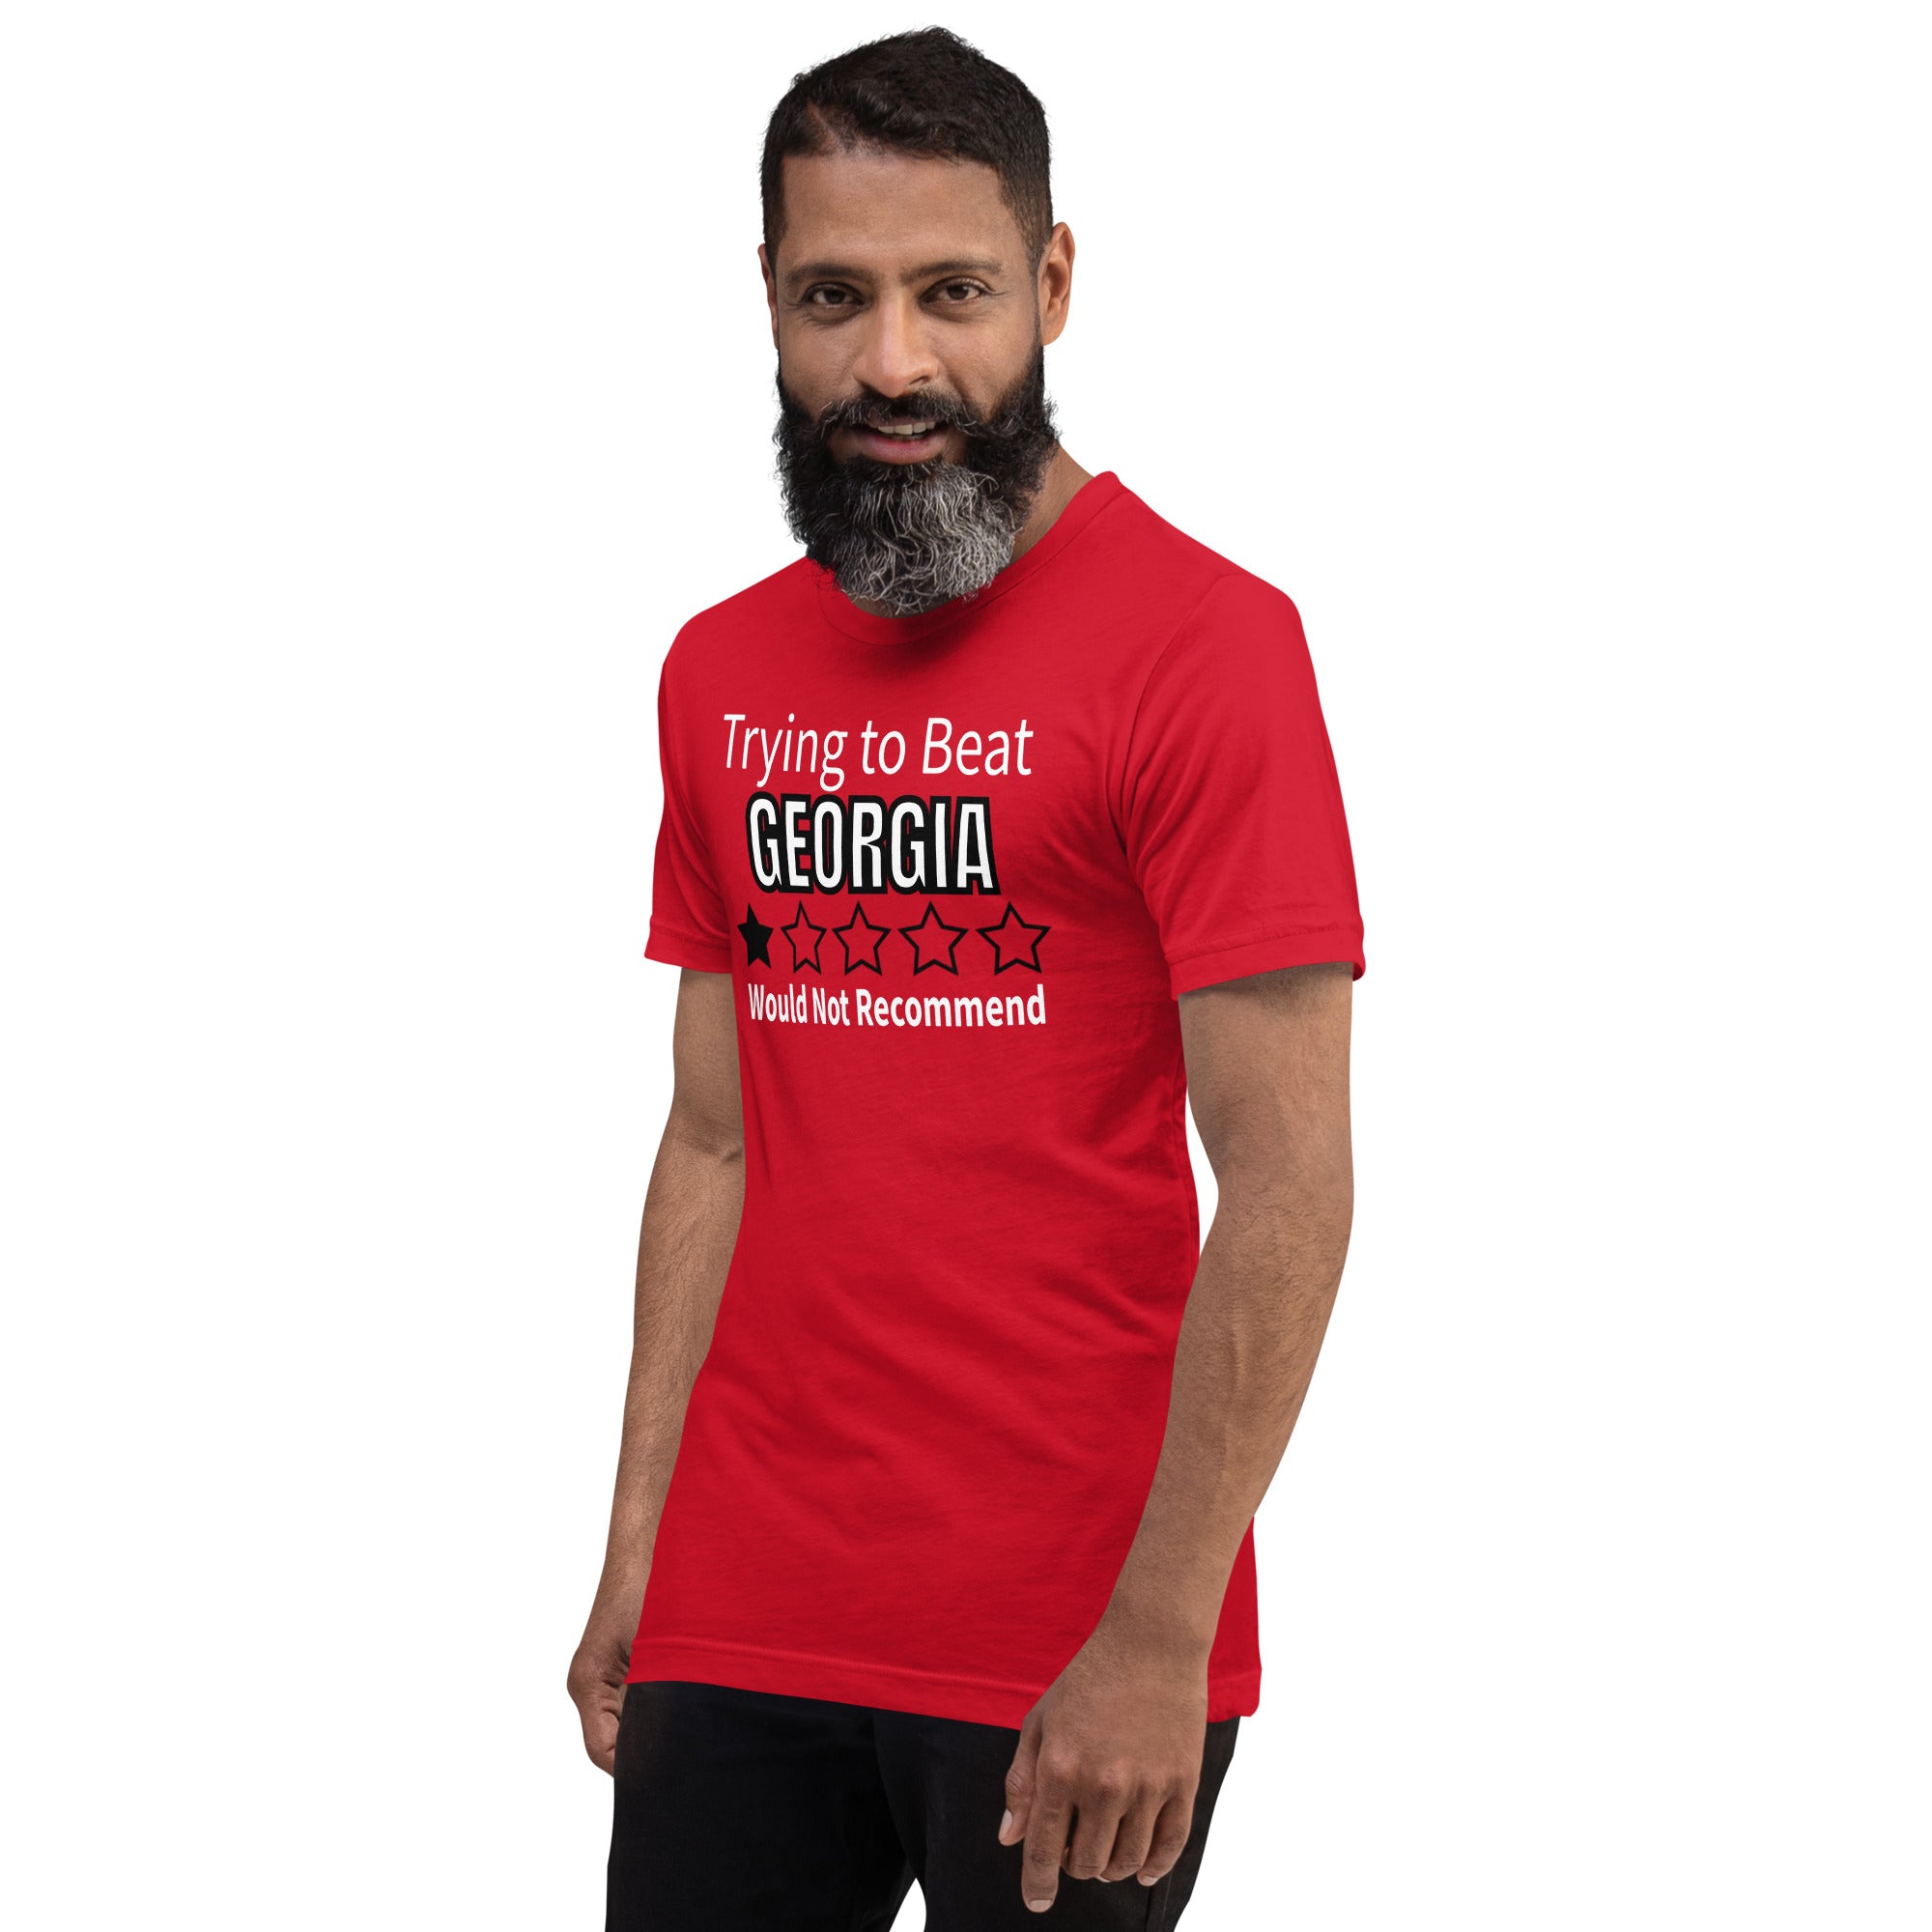 Trying to Beat Georgia Would Not Recommend T-Shirt for Georgia Fans